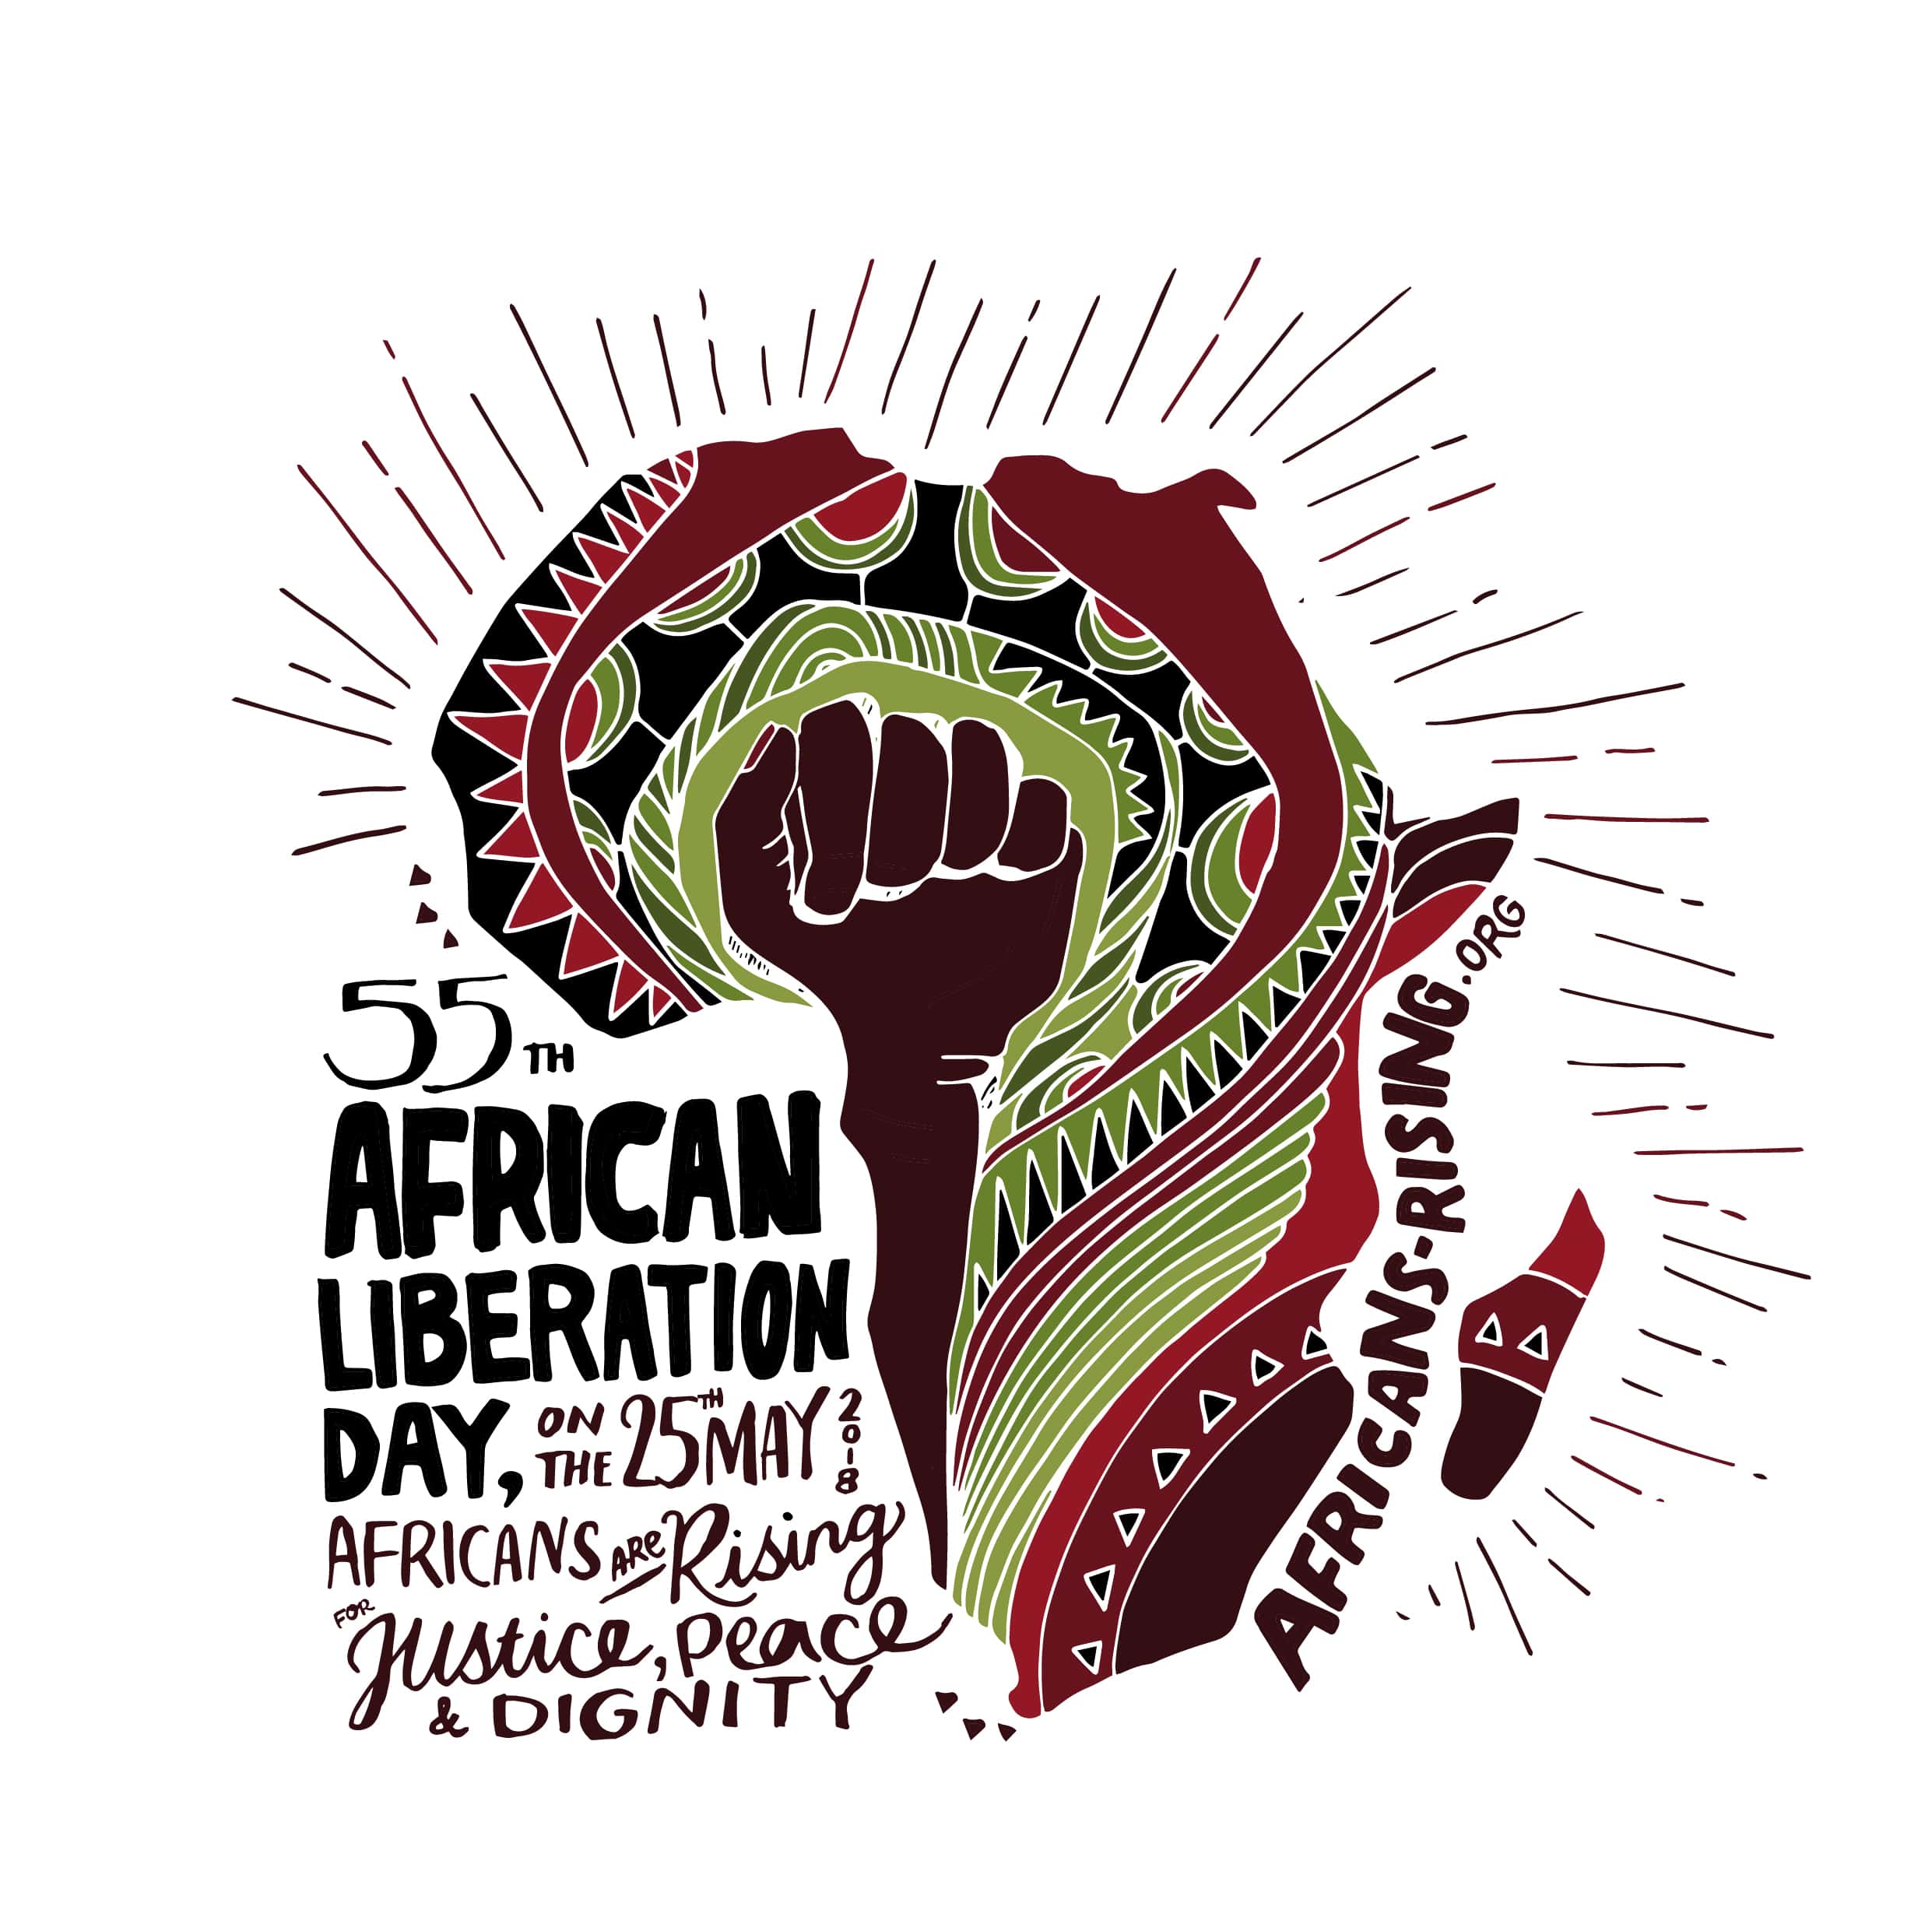 55th African Liberation Day To Be Celebrated On Friday